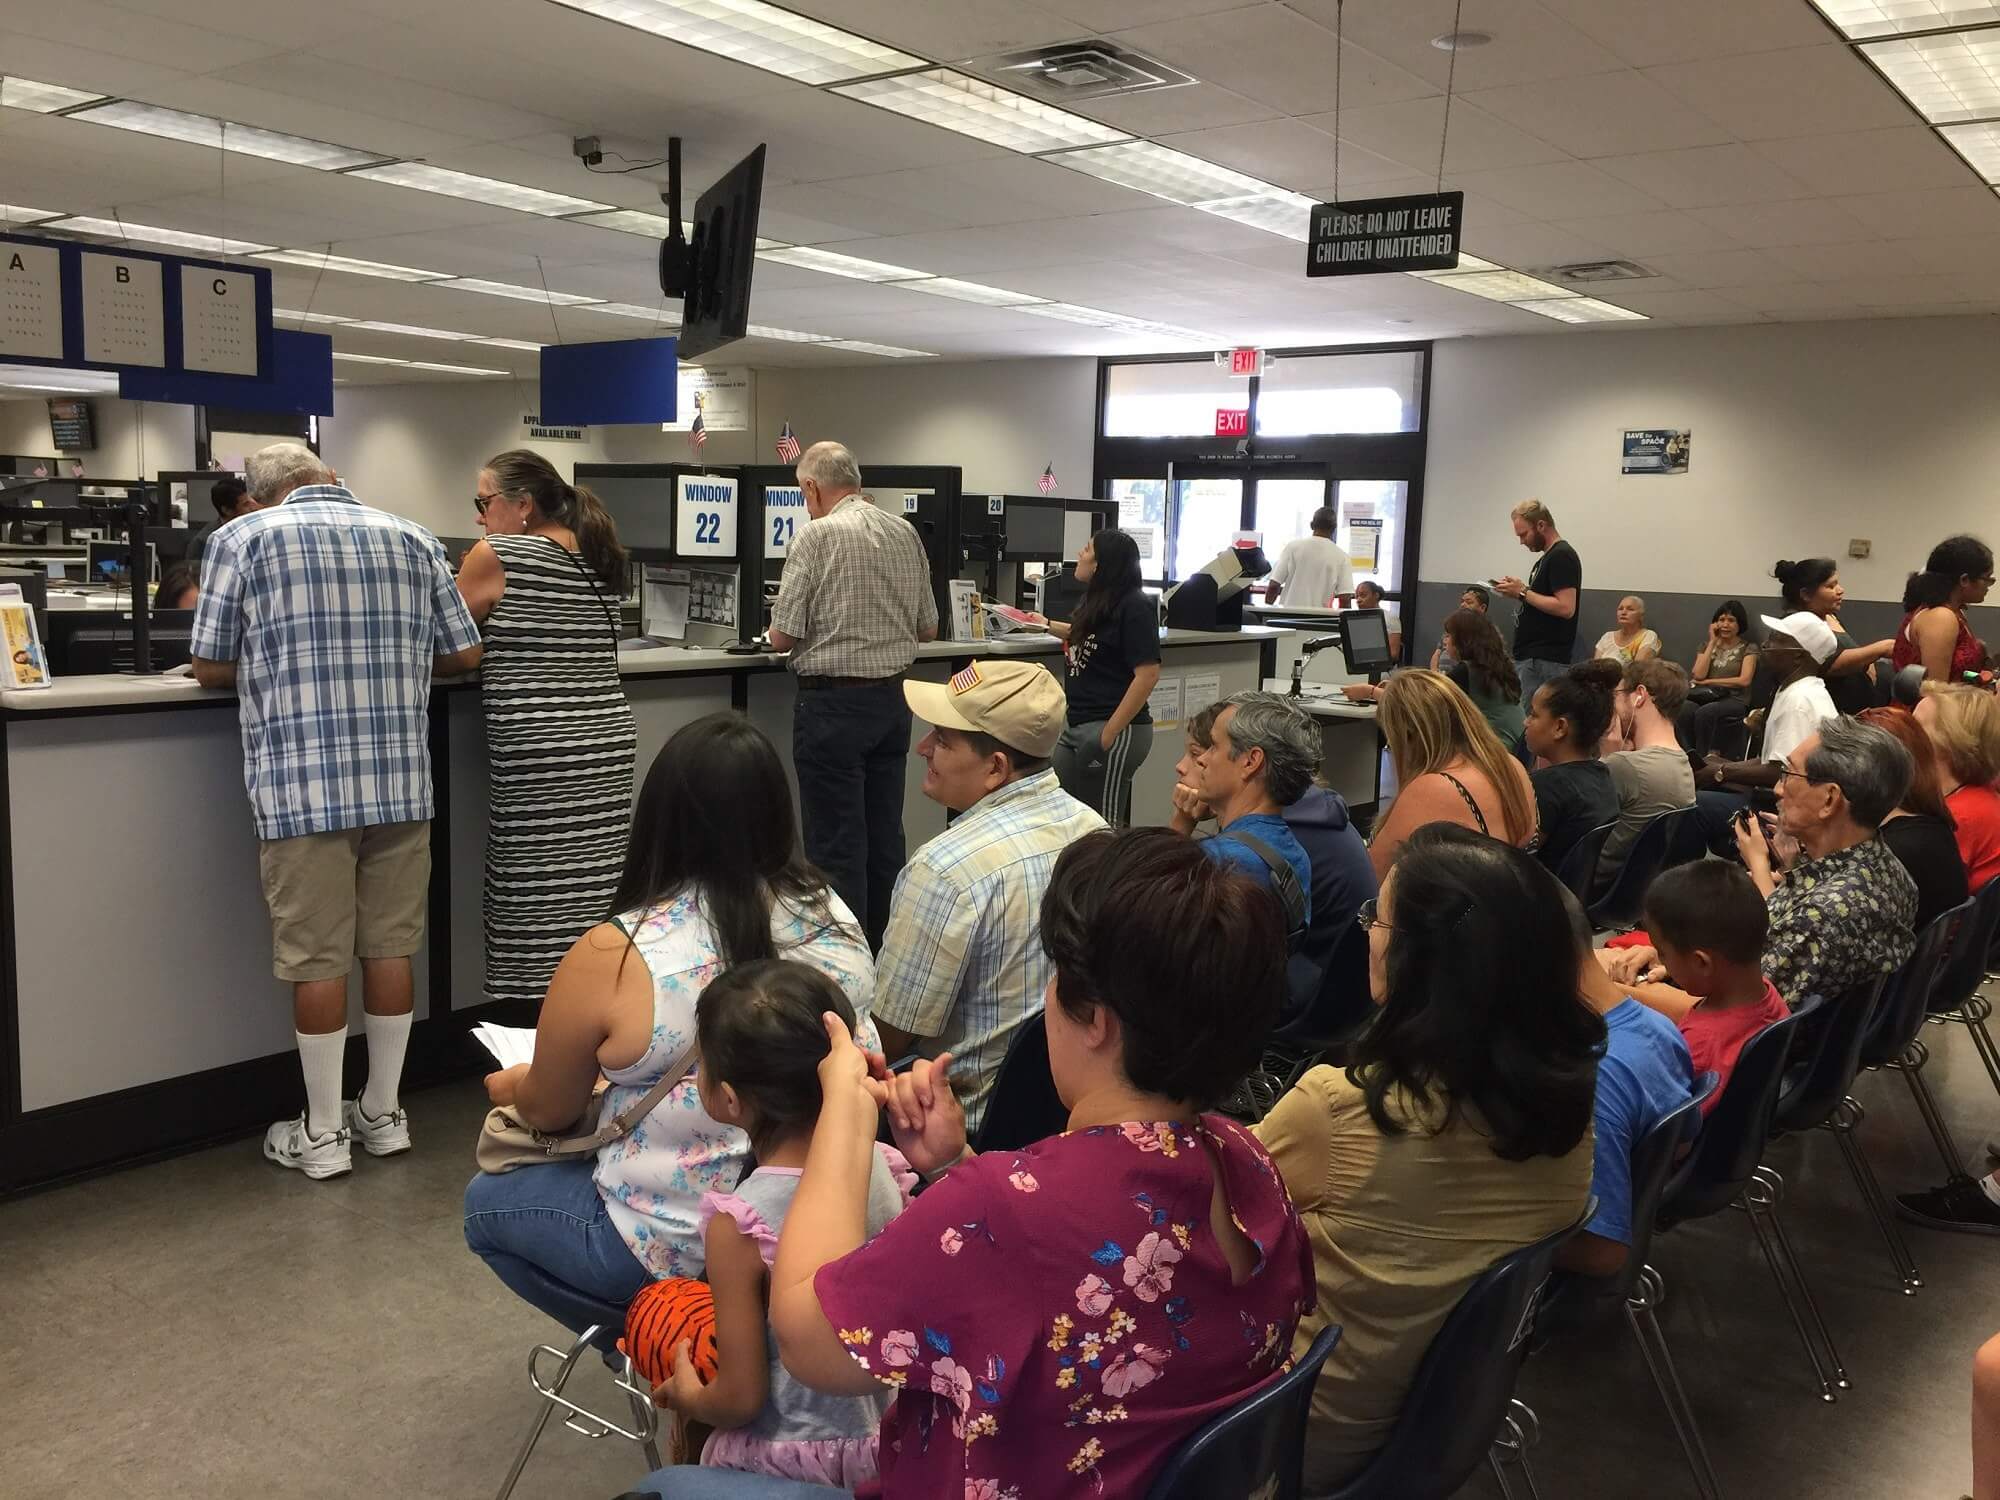 California's DMV is making $50 million per year from selling private data